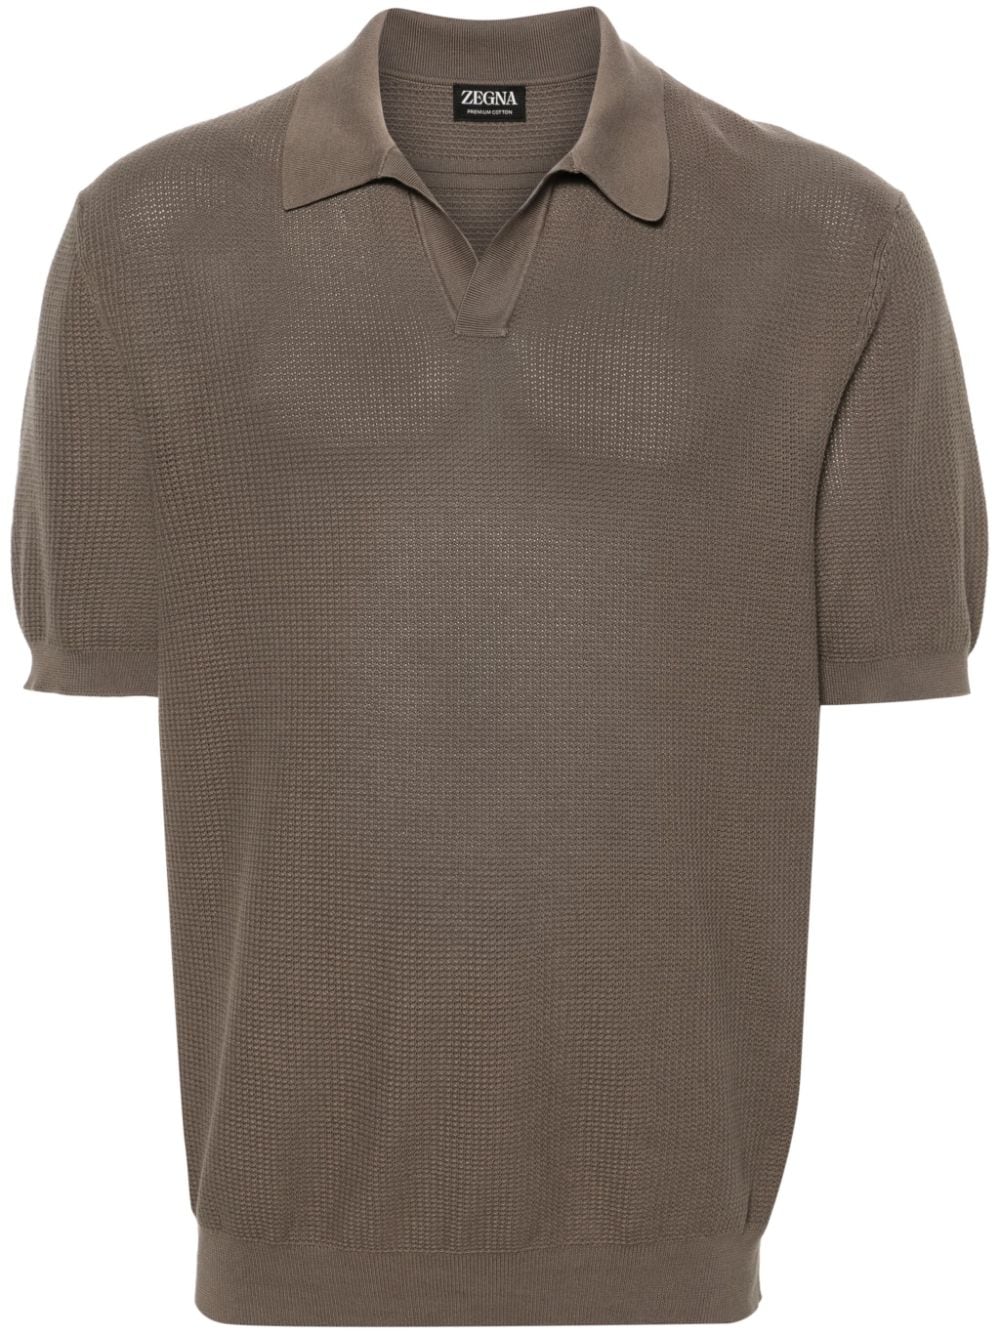 Image 1 of Zegna knitted cotton polo shirt